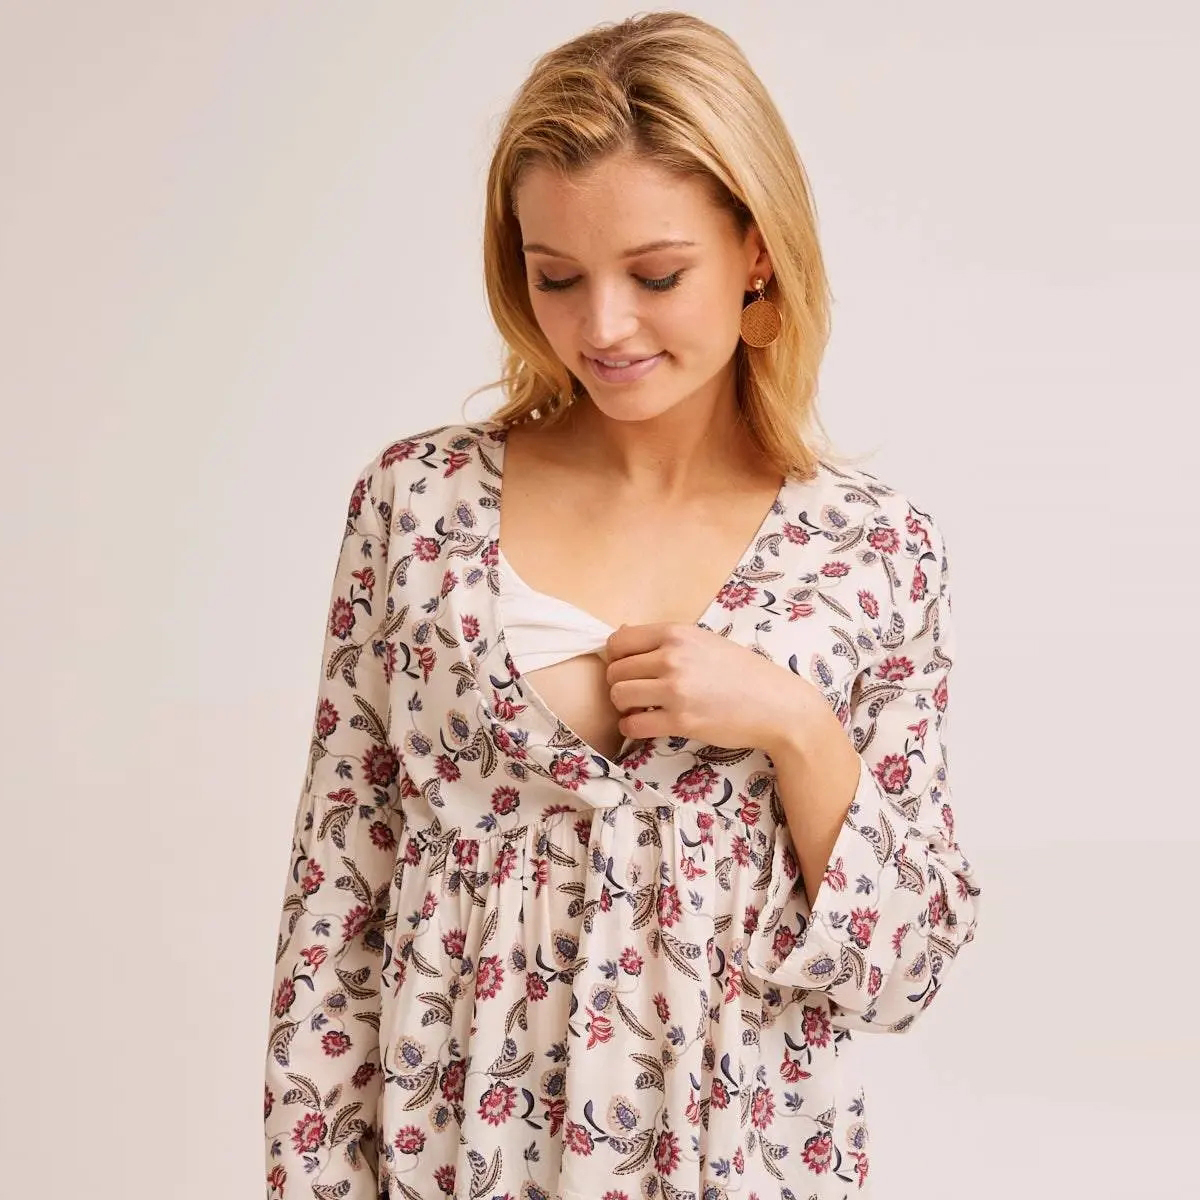 Floral Print Maternity Top For Ladies (1)